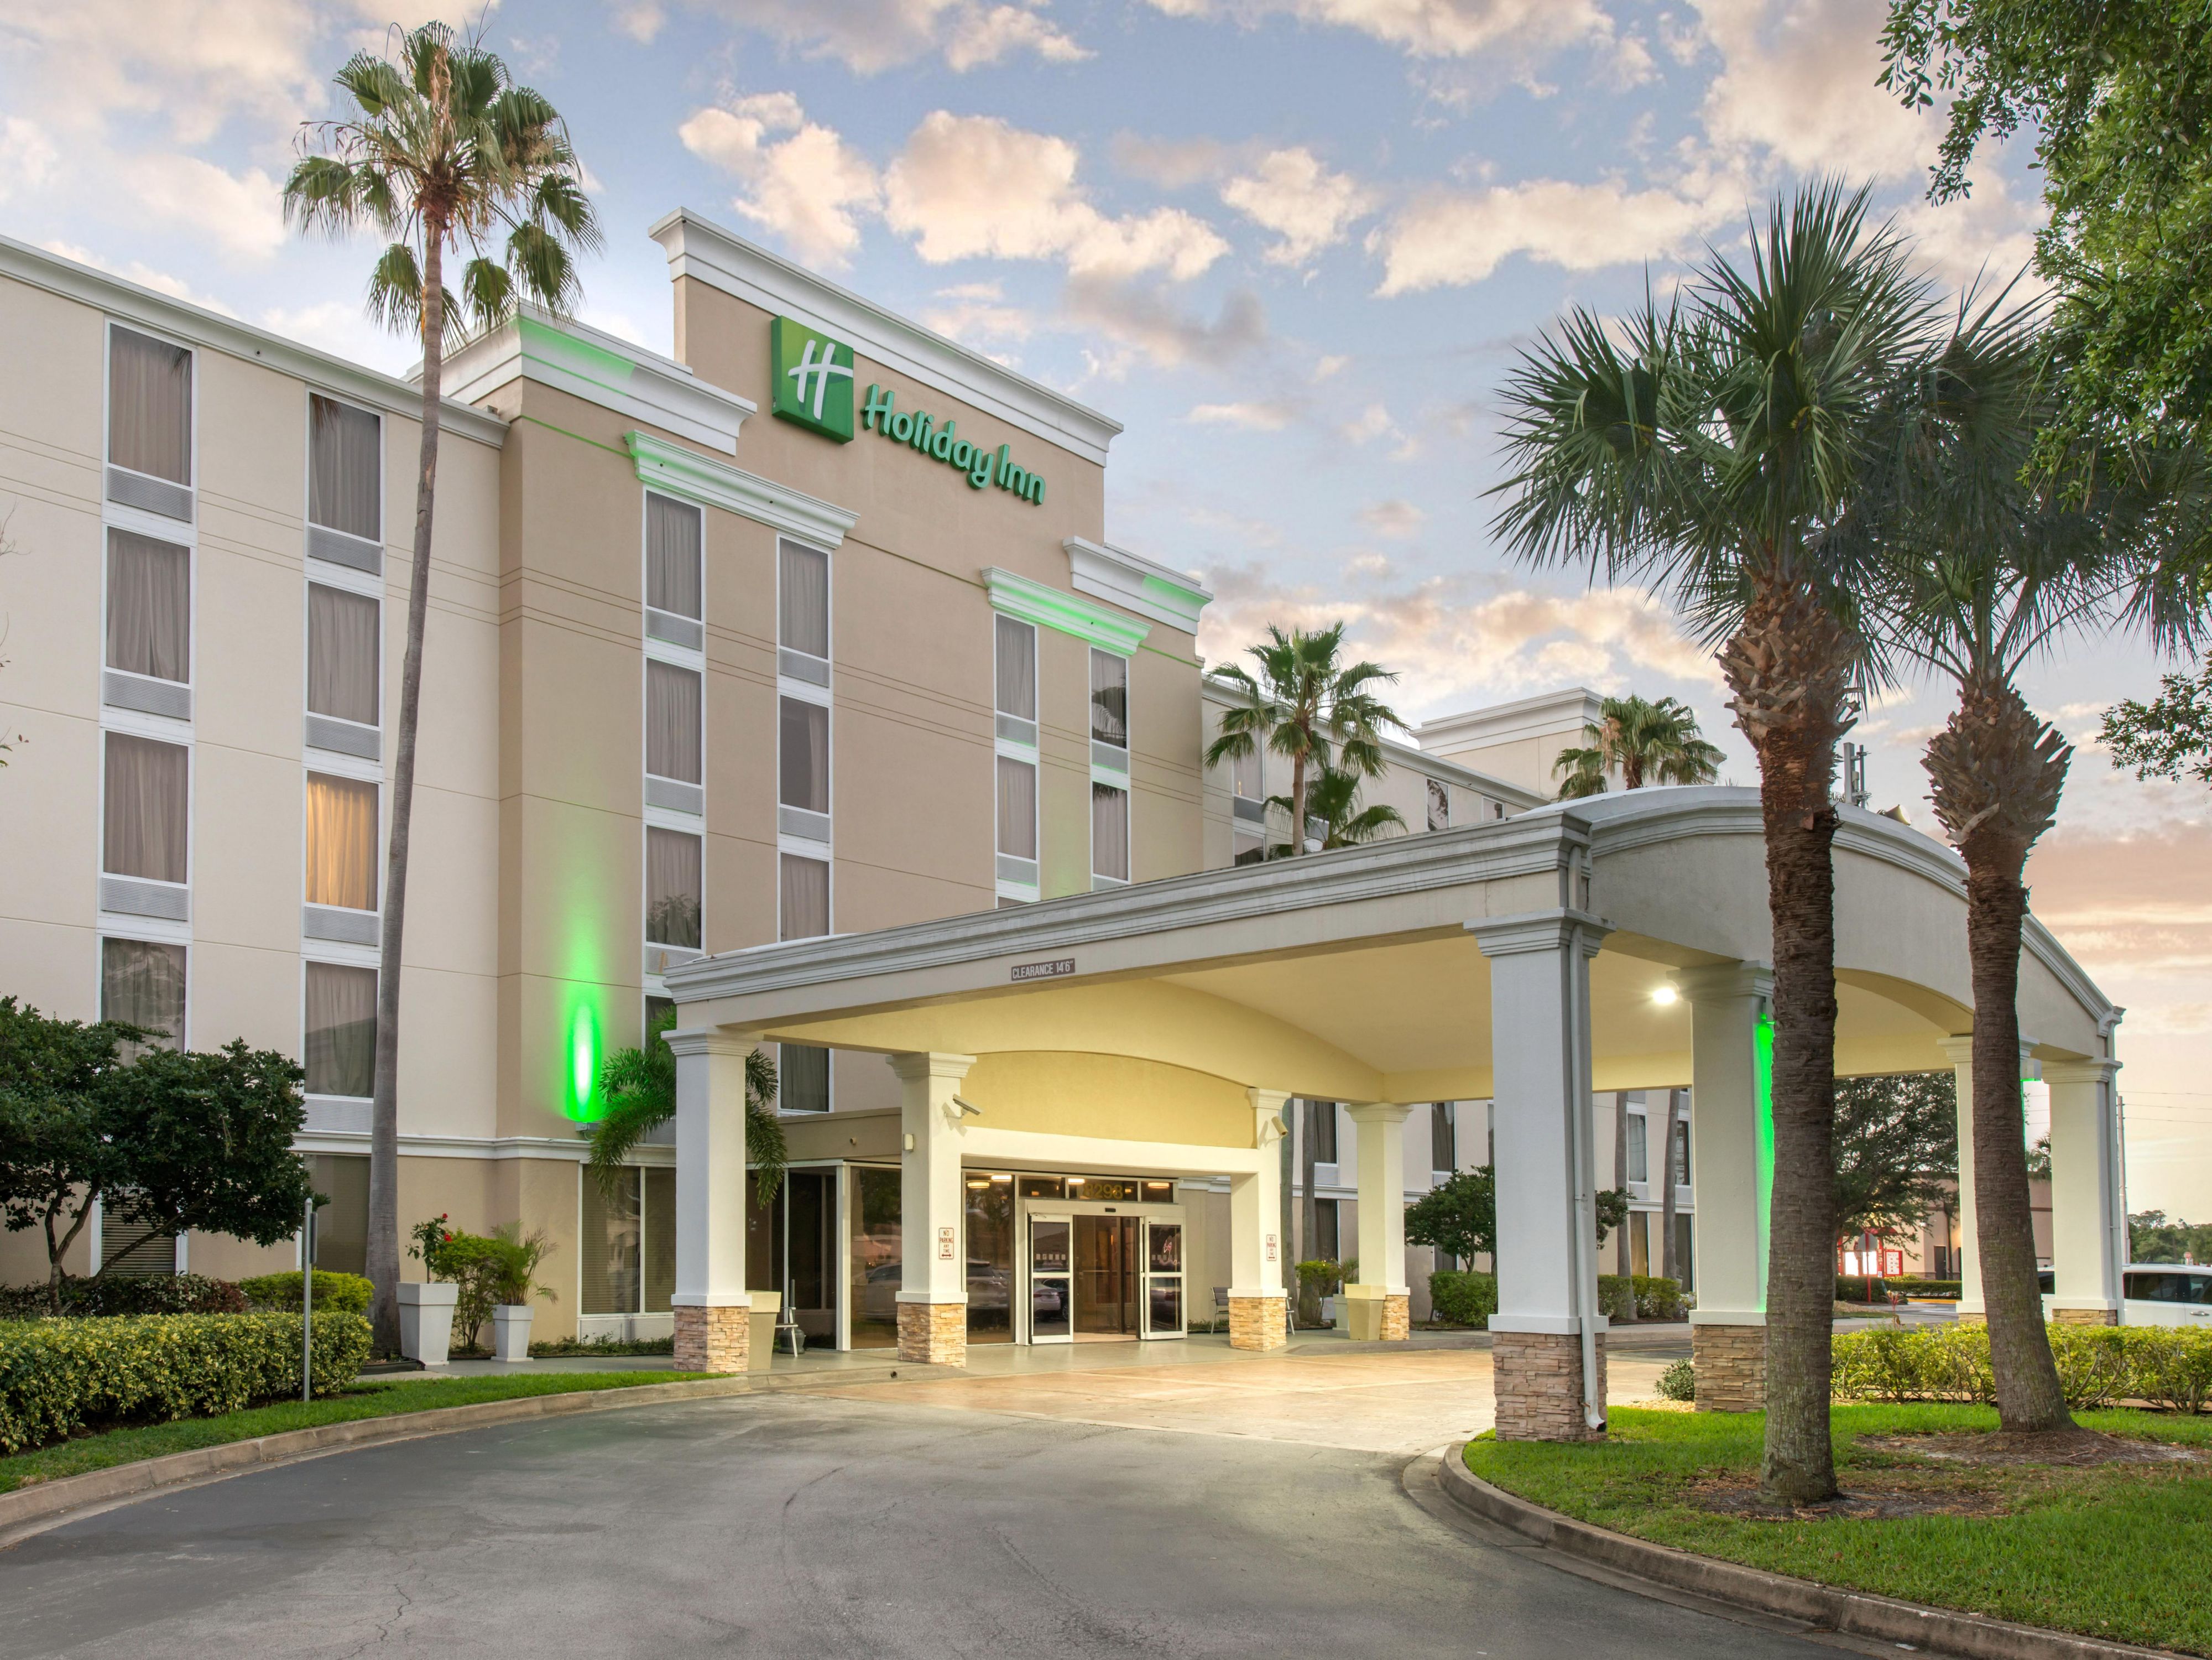 Our hotel puts you in the heart of Melbourne, minutes from shopping, dining, events, and entertainment. We are less than two miles from the Avenue Viera outdoor mall area, golf courses, the Brevard Zoo, and superb local golf courses three Miles from USSSA Stadium.